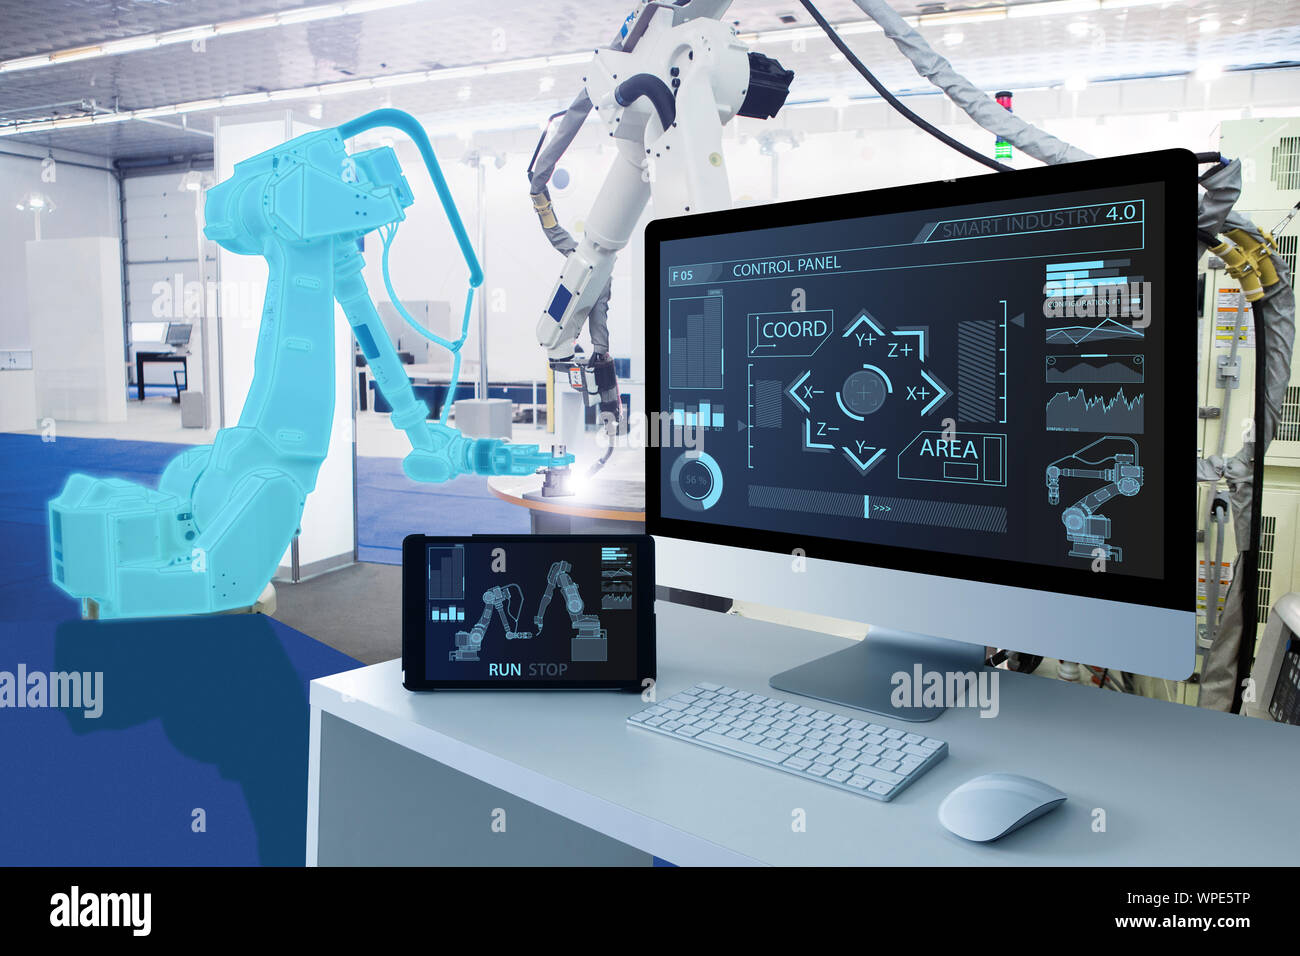 Computer and digital tablet for control of robots in a smart factory. Smart industry 4.0 concept Stock Photo